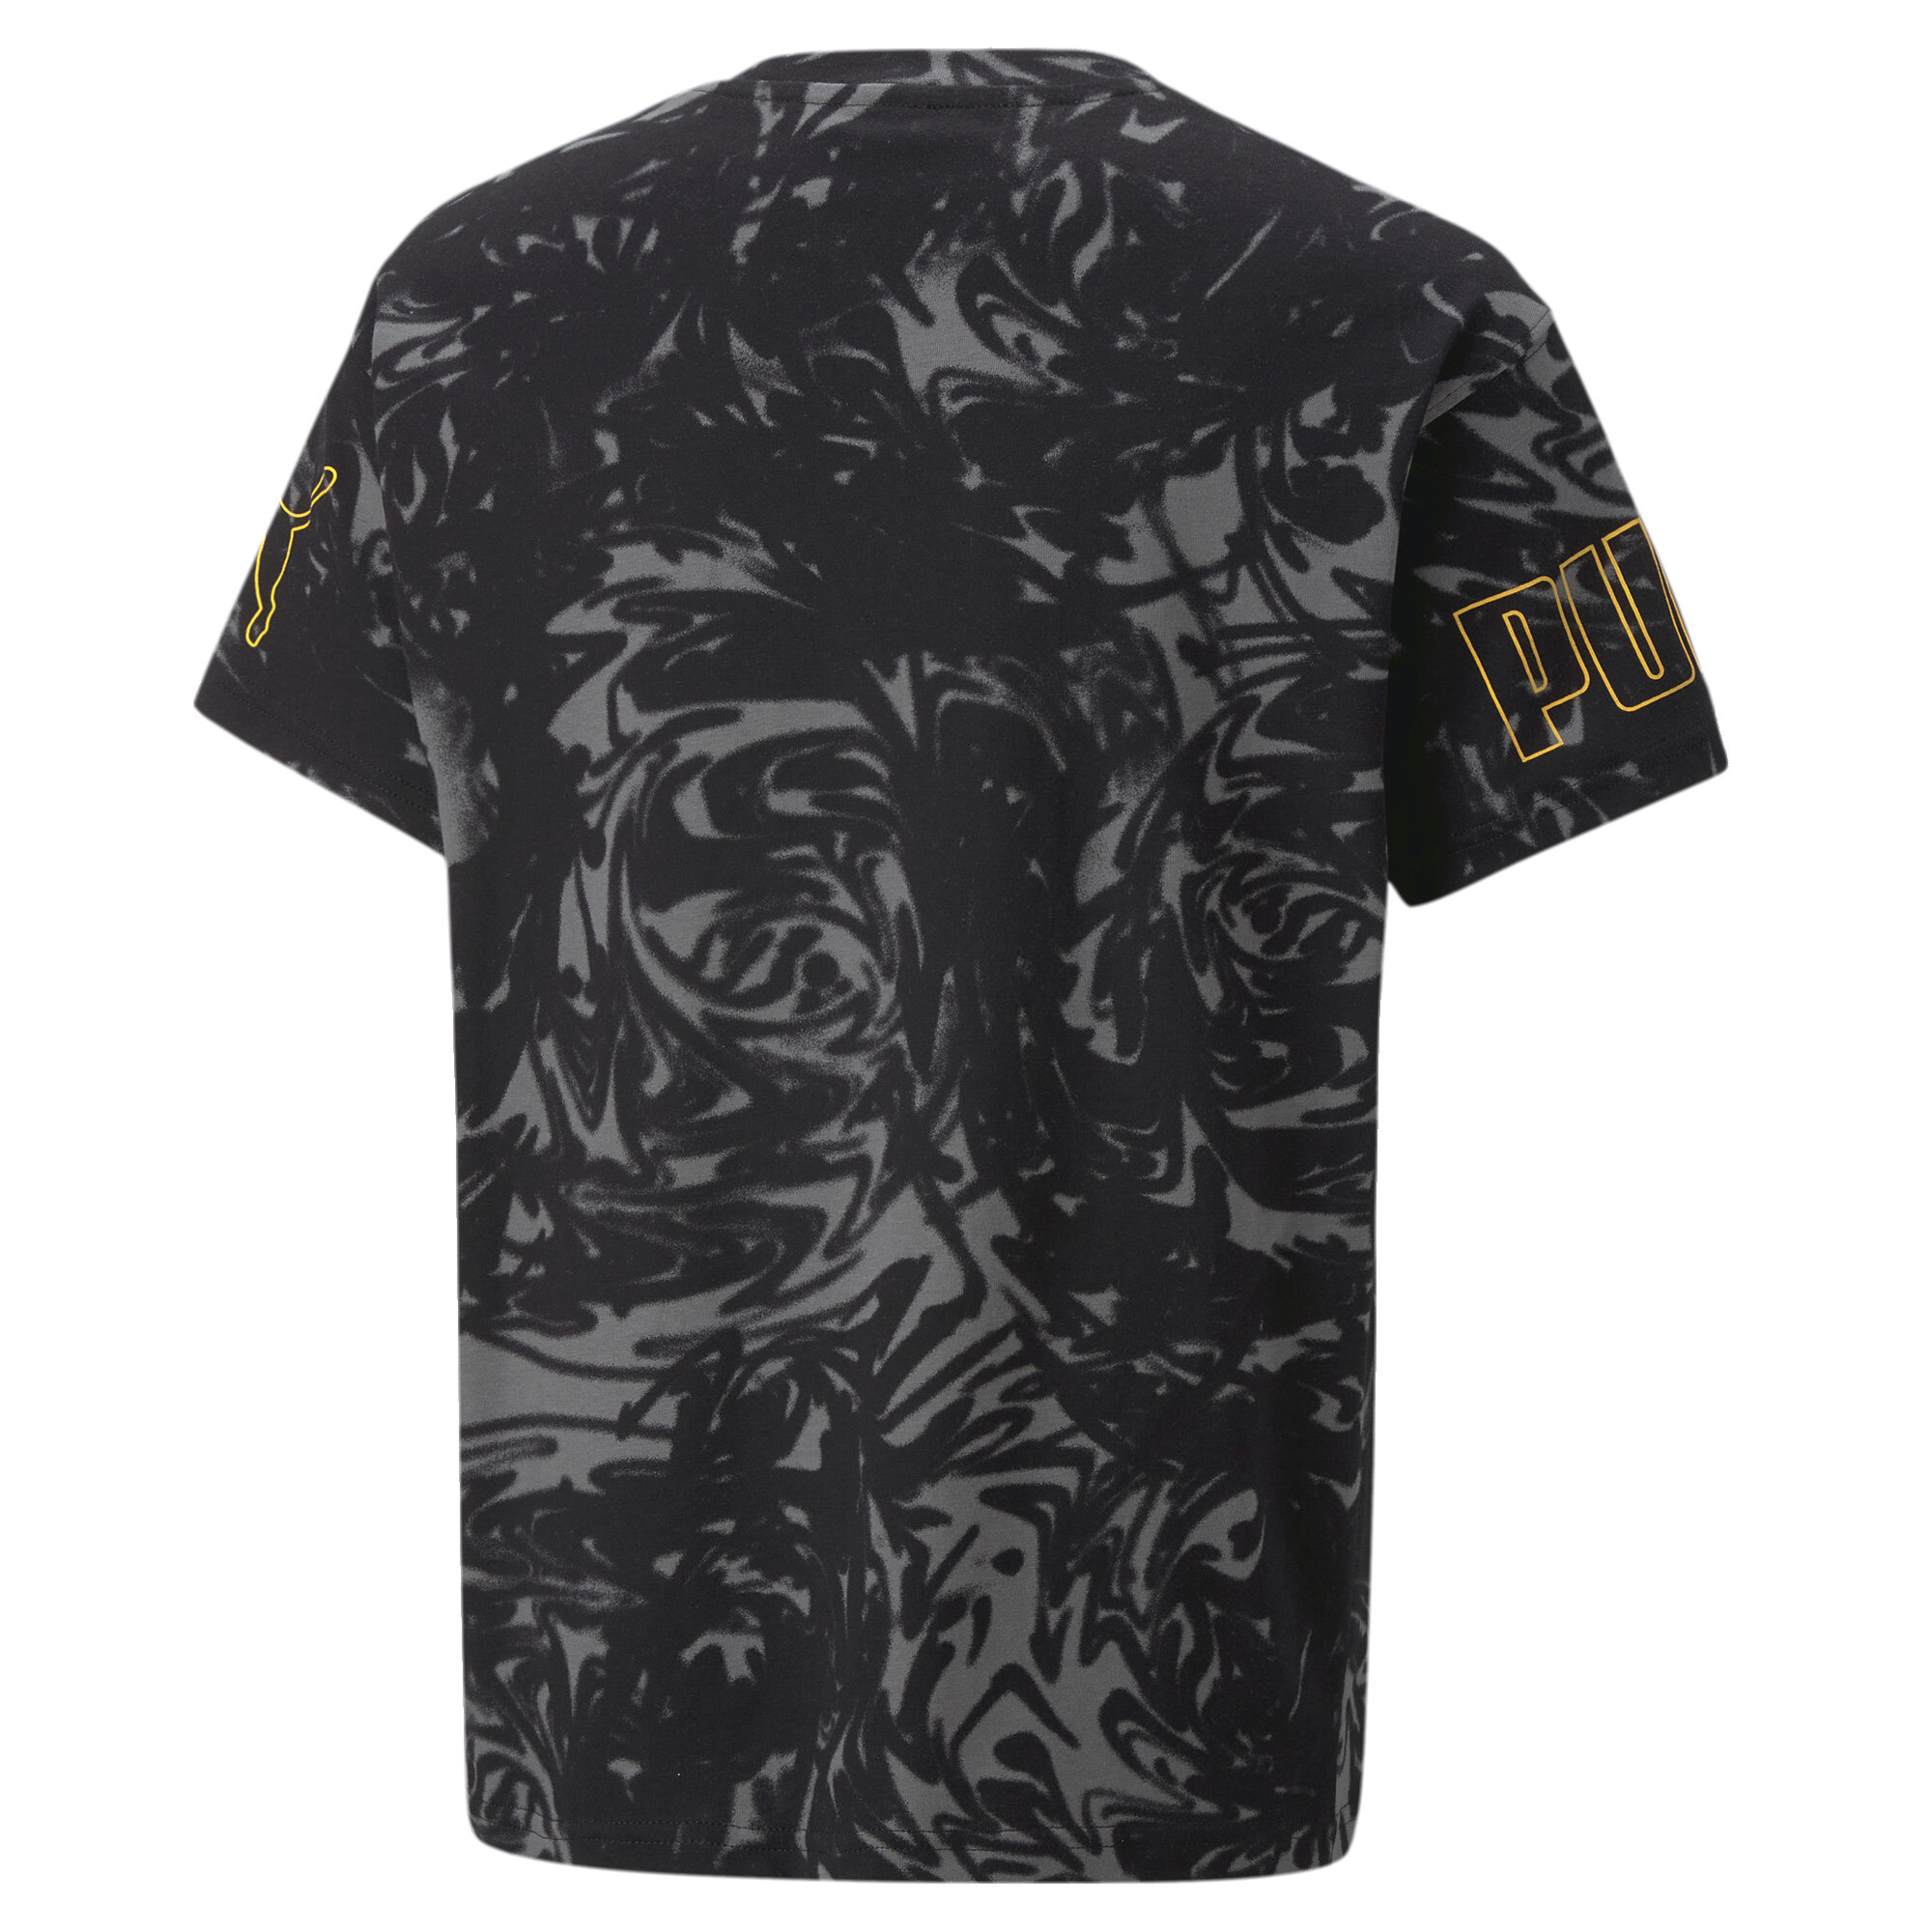 PUMA POWER SUMMER Printed T-Shirt In Black, Size 11-12 Youth